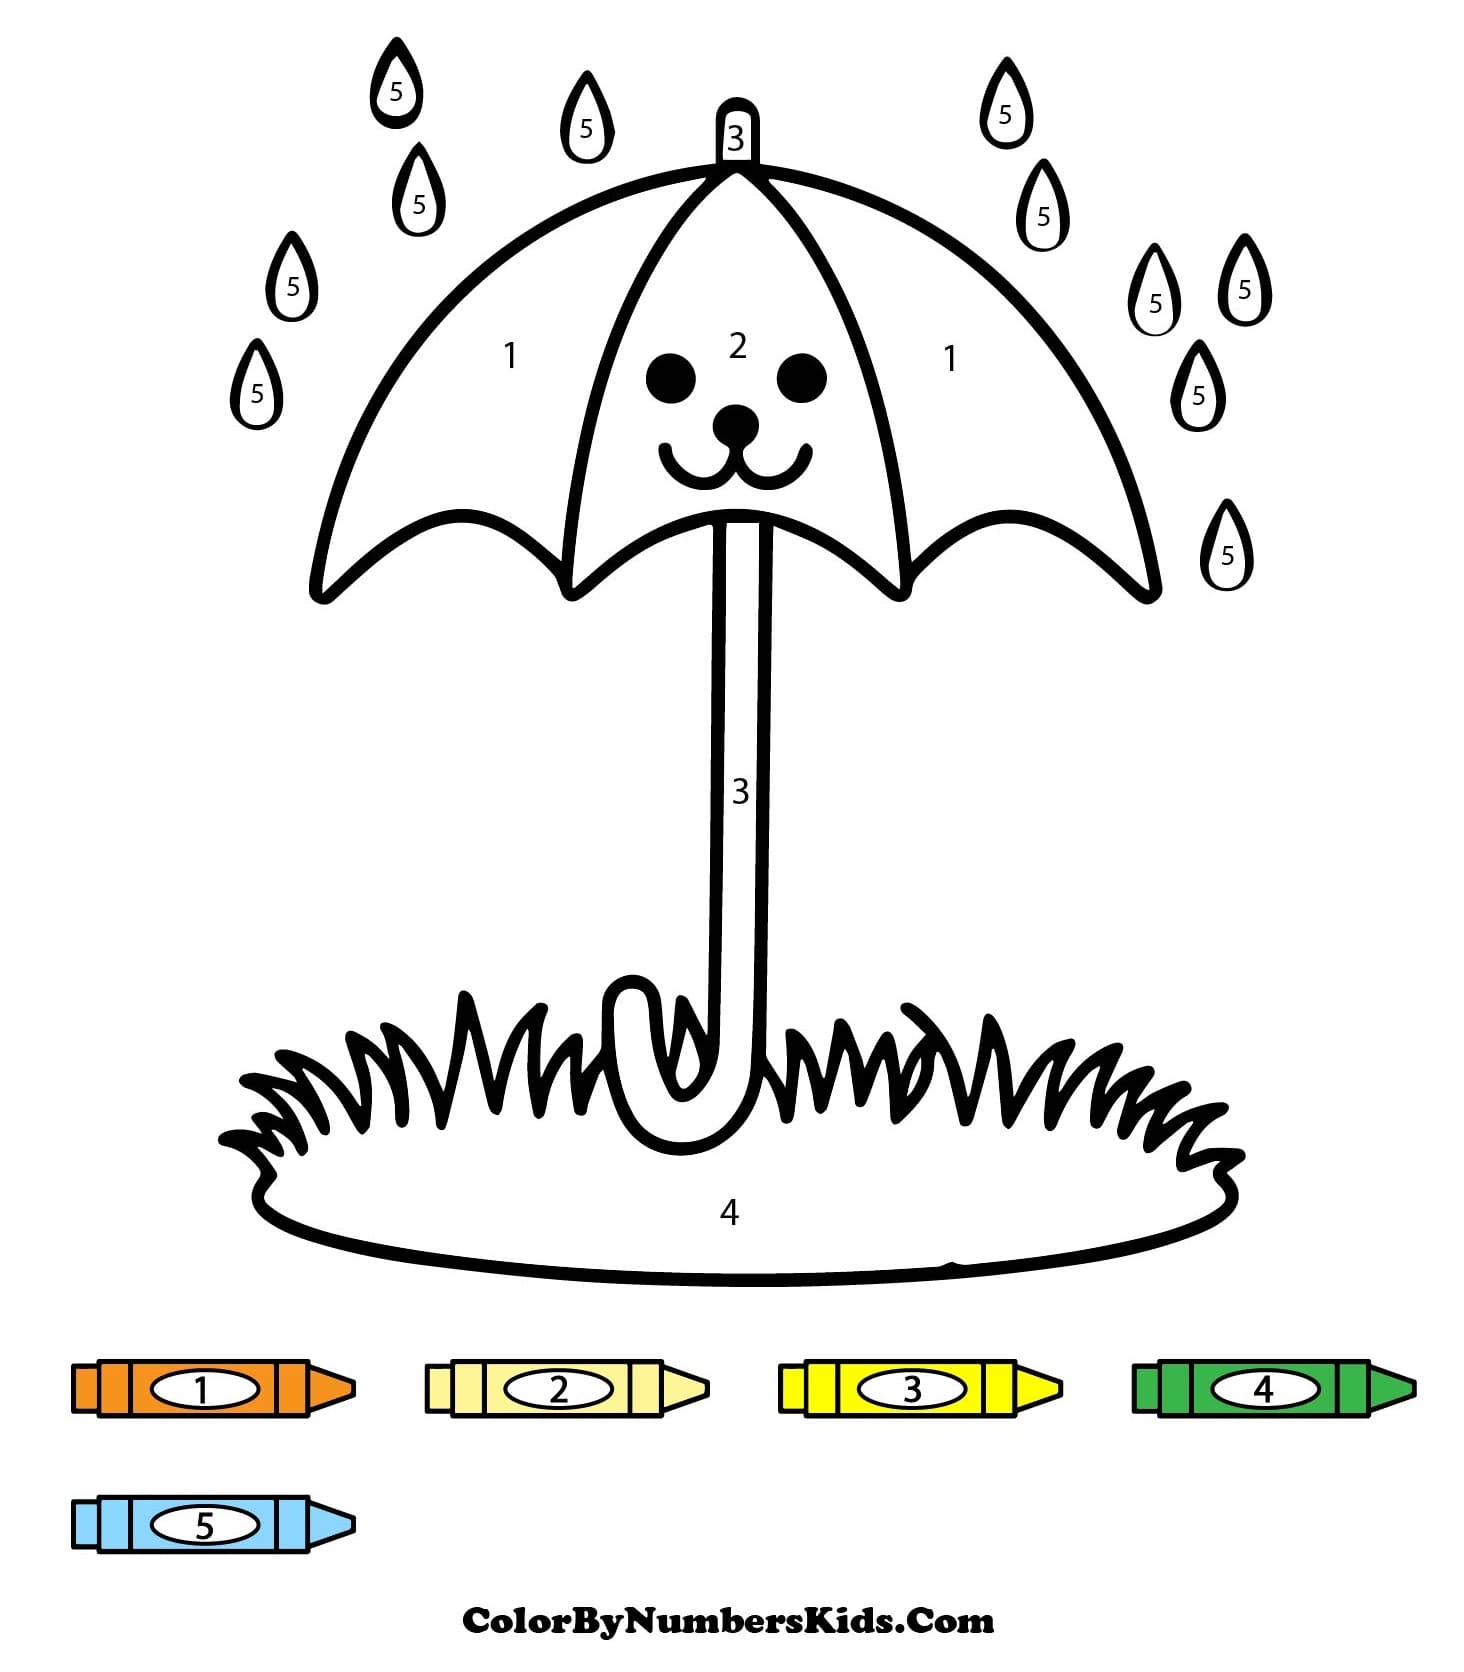 Puppy Umbrella Color By Number